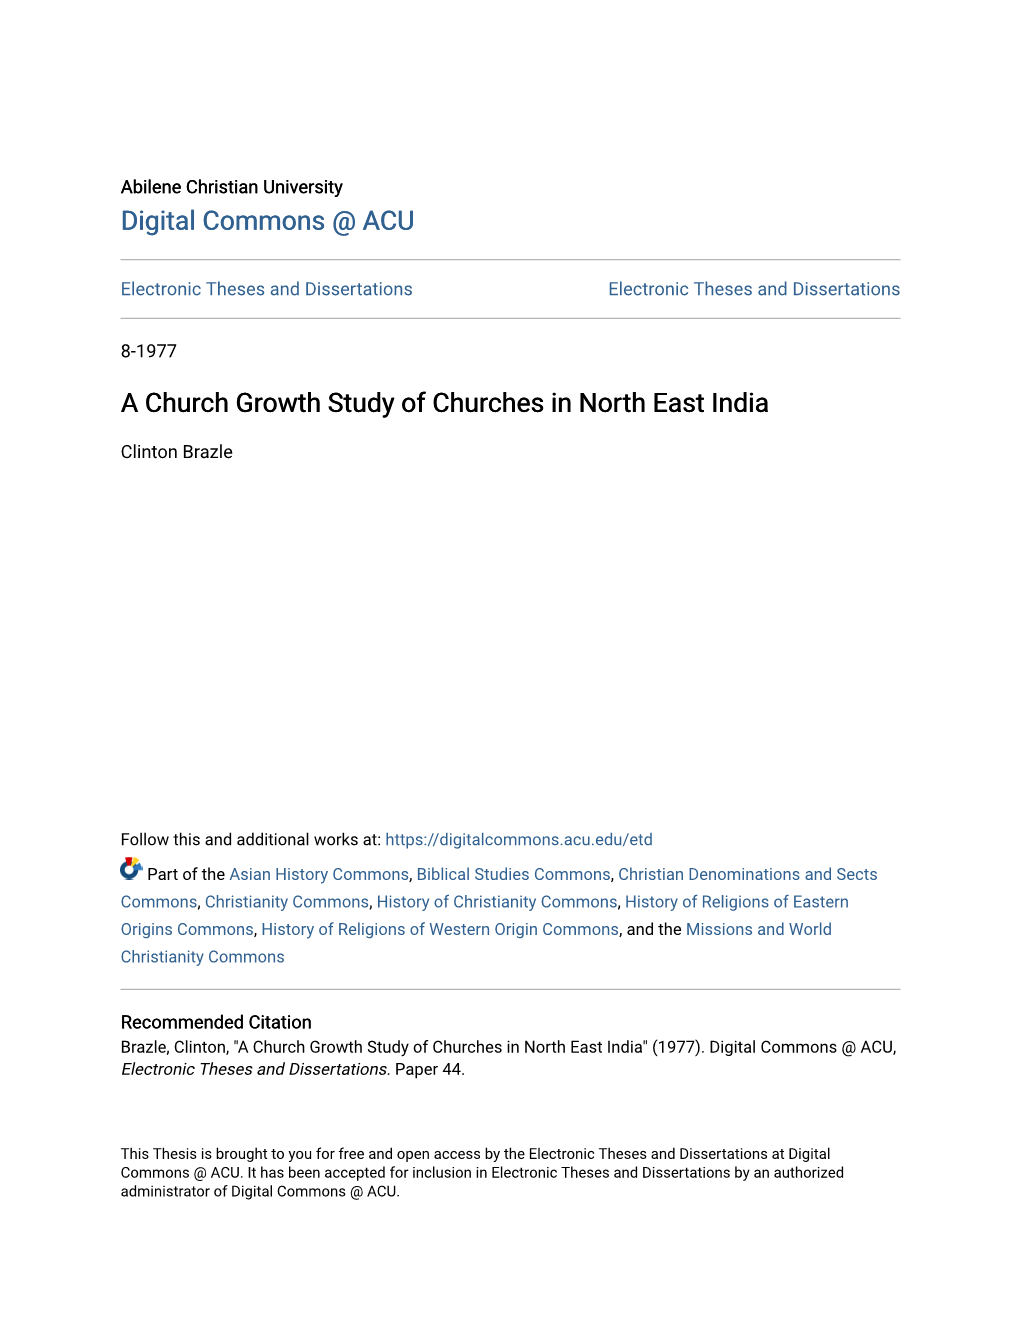 A Church Growth Study of Churches in North East India